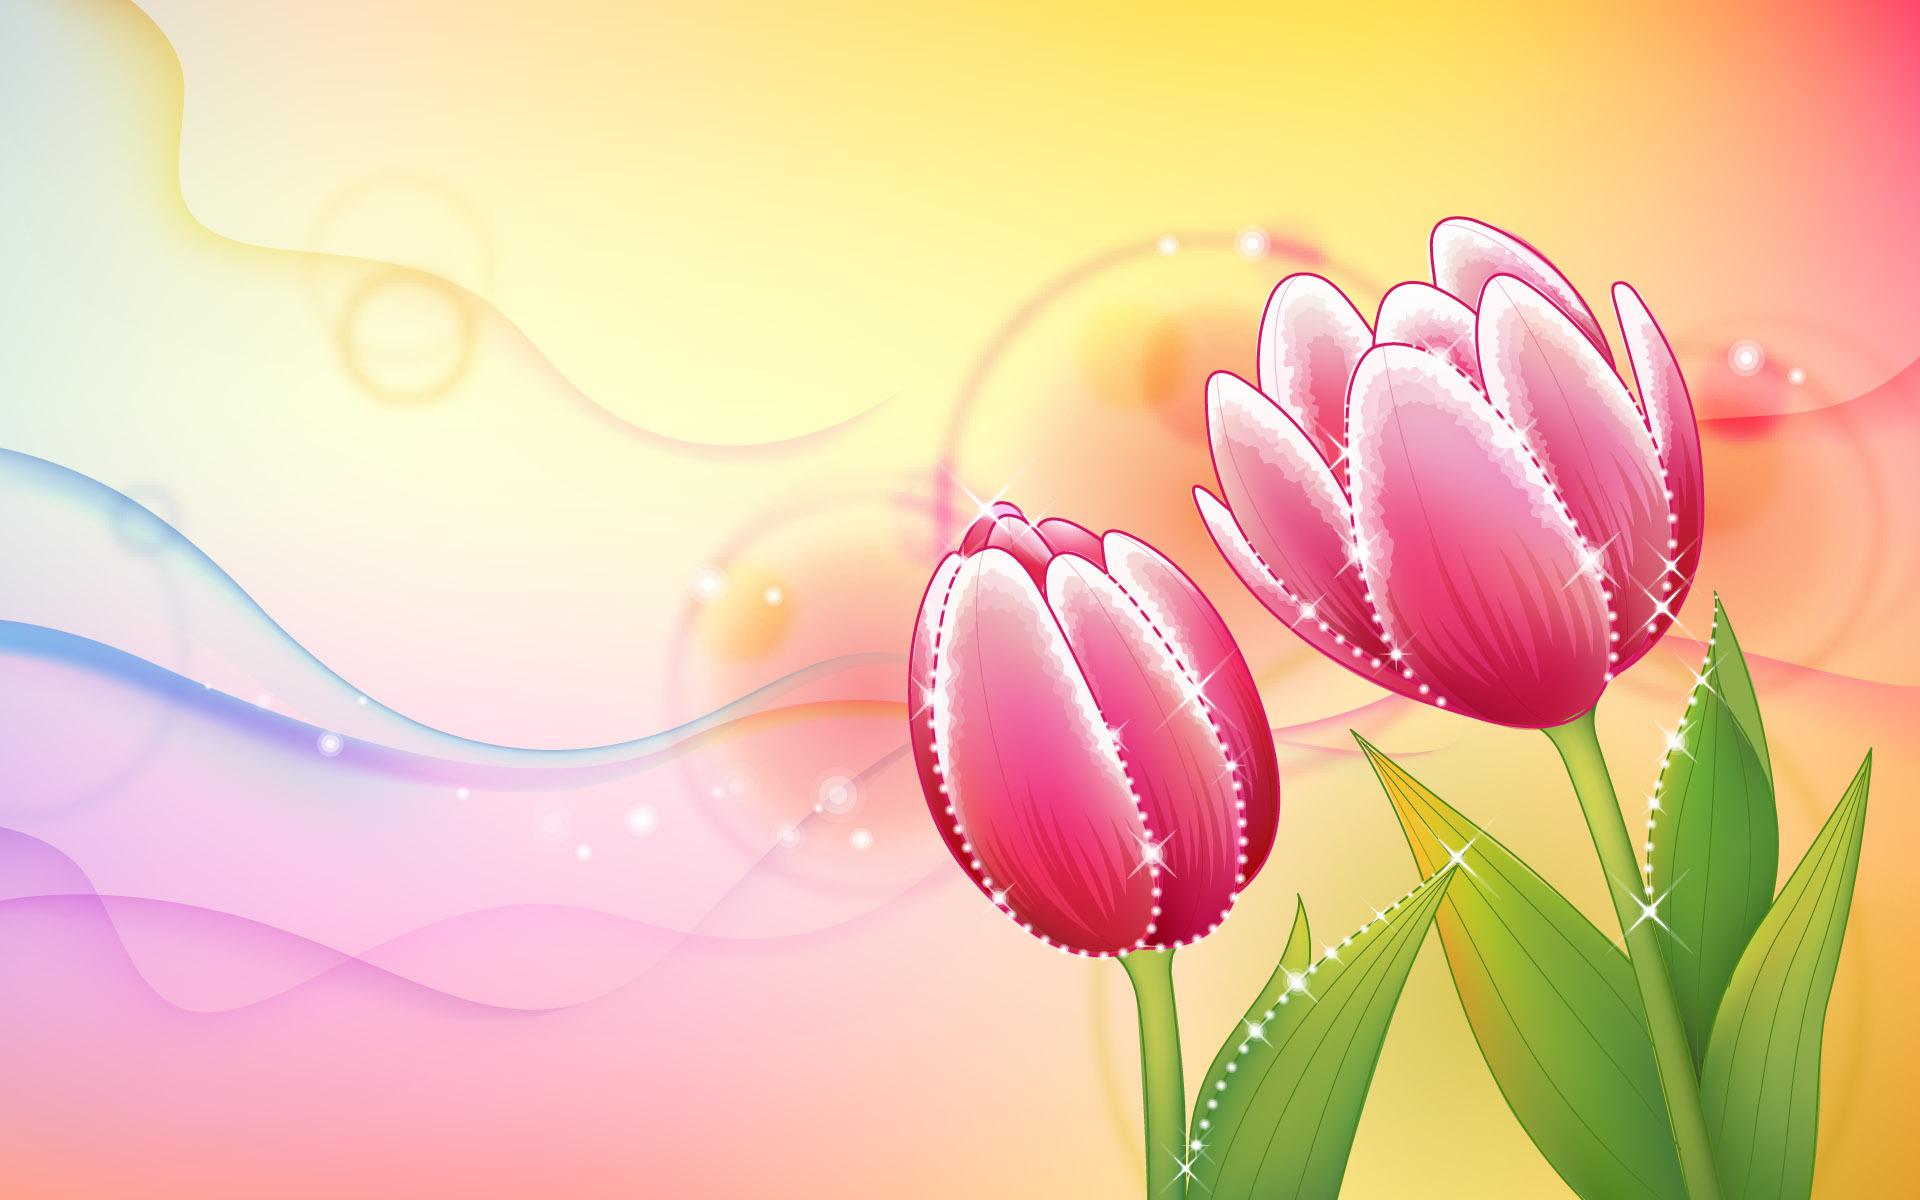 Abstract Flowers Design Wallpaper Photo Of Pictures